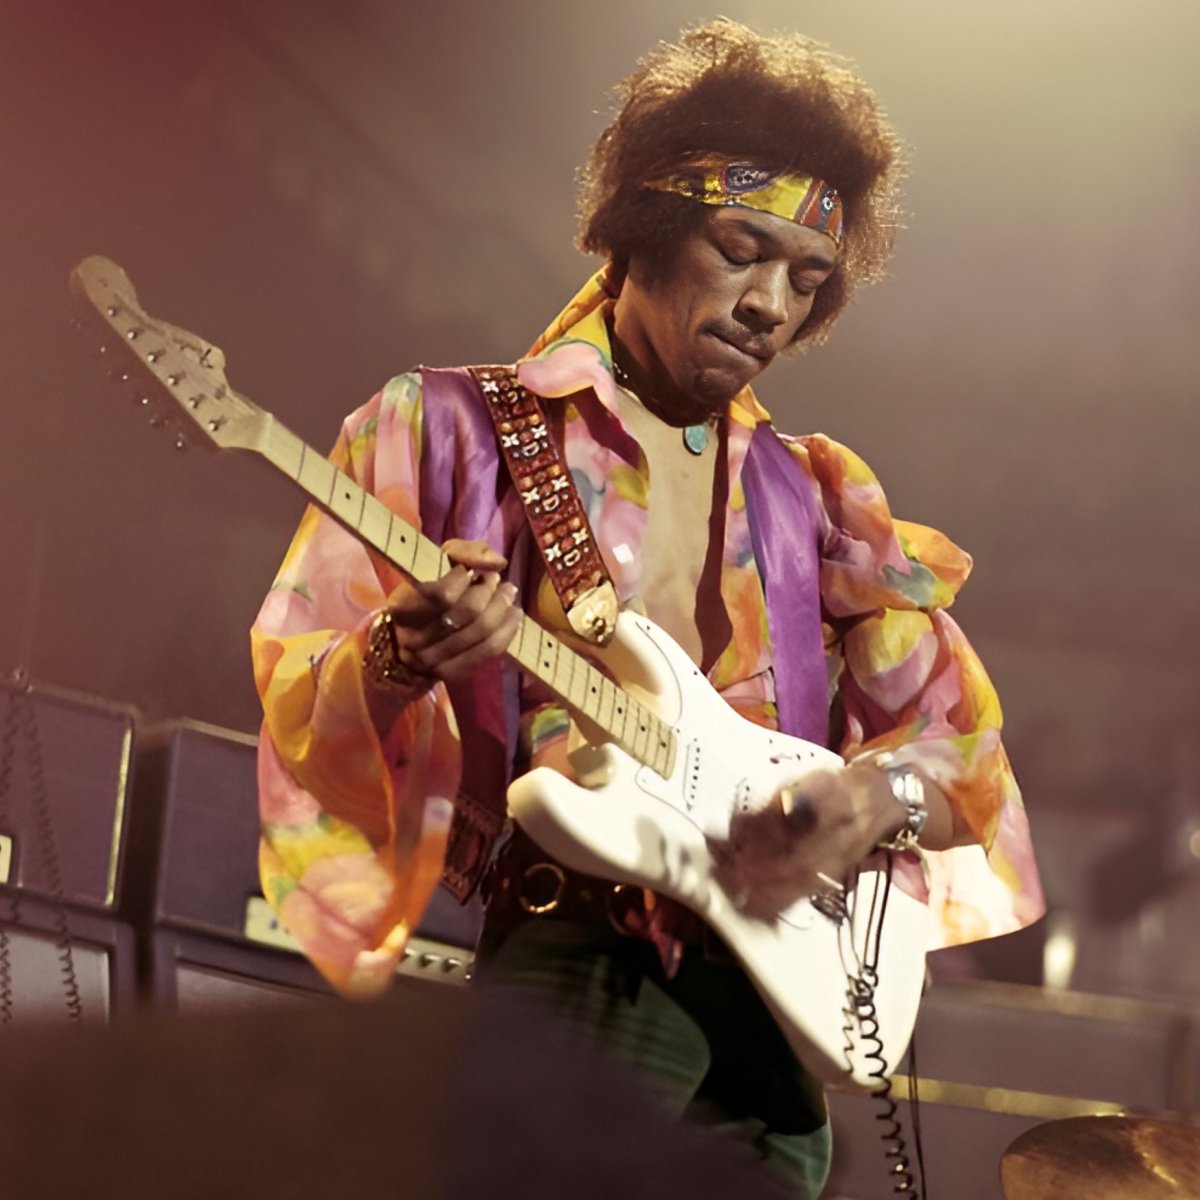 On this day in 1970, rock guitarist Jimi Hendrix died at 27 years old. James Marshall 'Jimi' Hendrix ,was a musician, singer, and songwriter. Despite a relatively brief mainstream career spanning four years, he is widely regarded as one of the greatest and most influential…